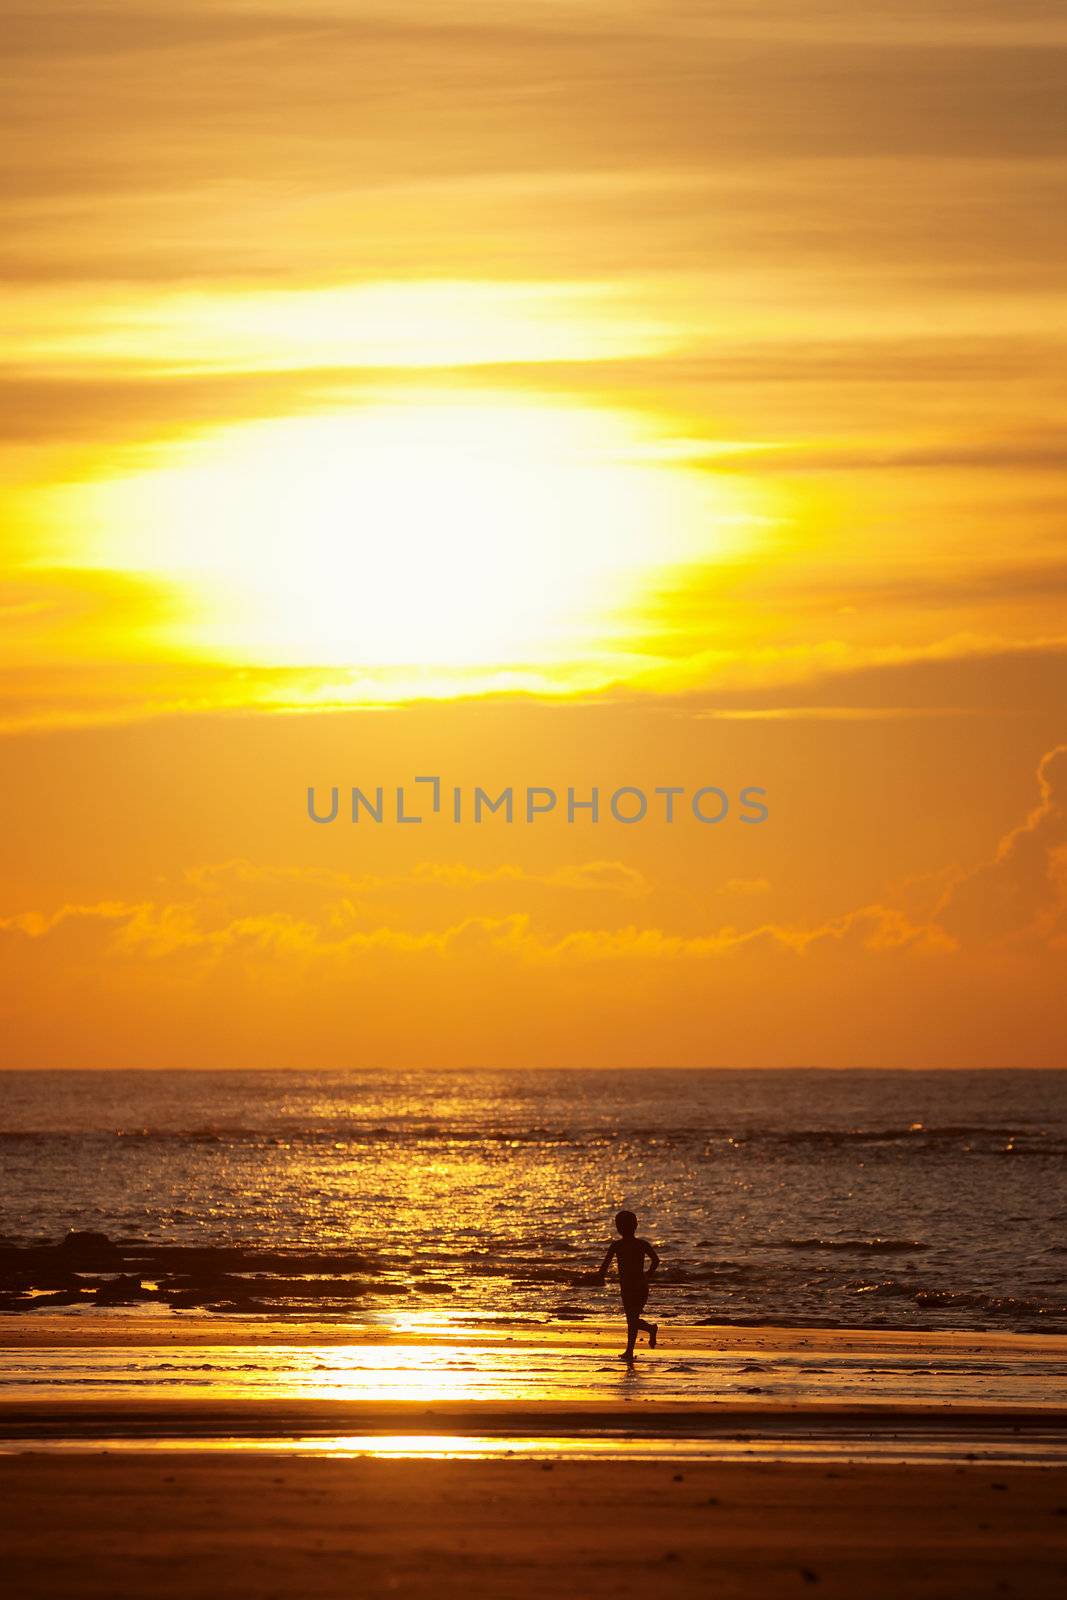 Sunset on a beach with silhouette of a kid by pzaxe